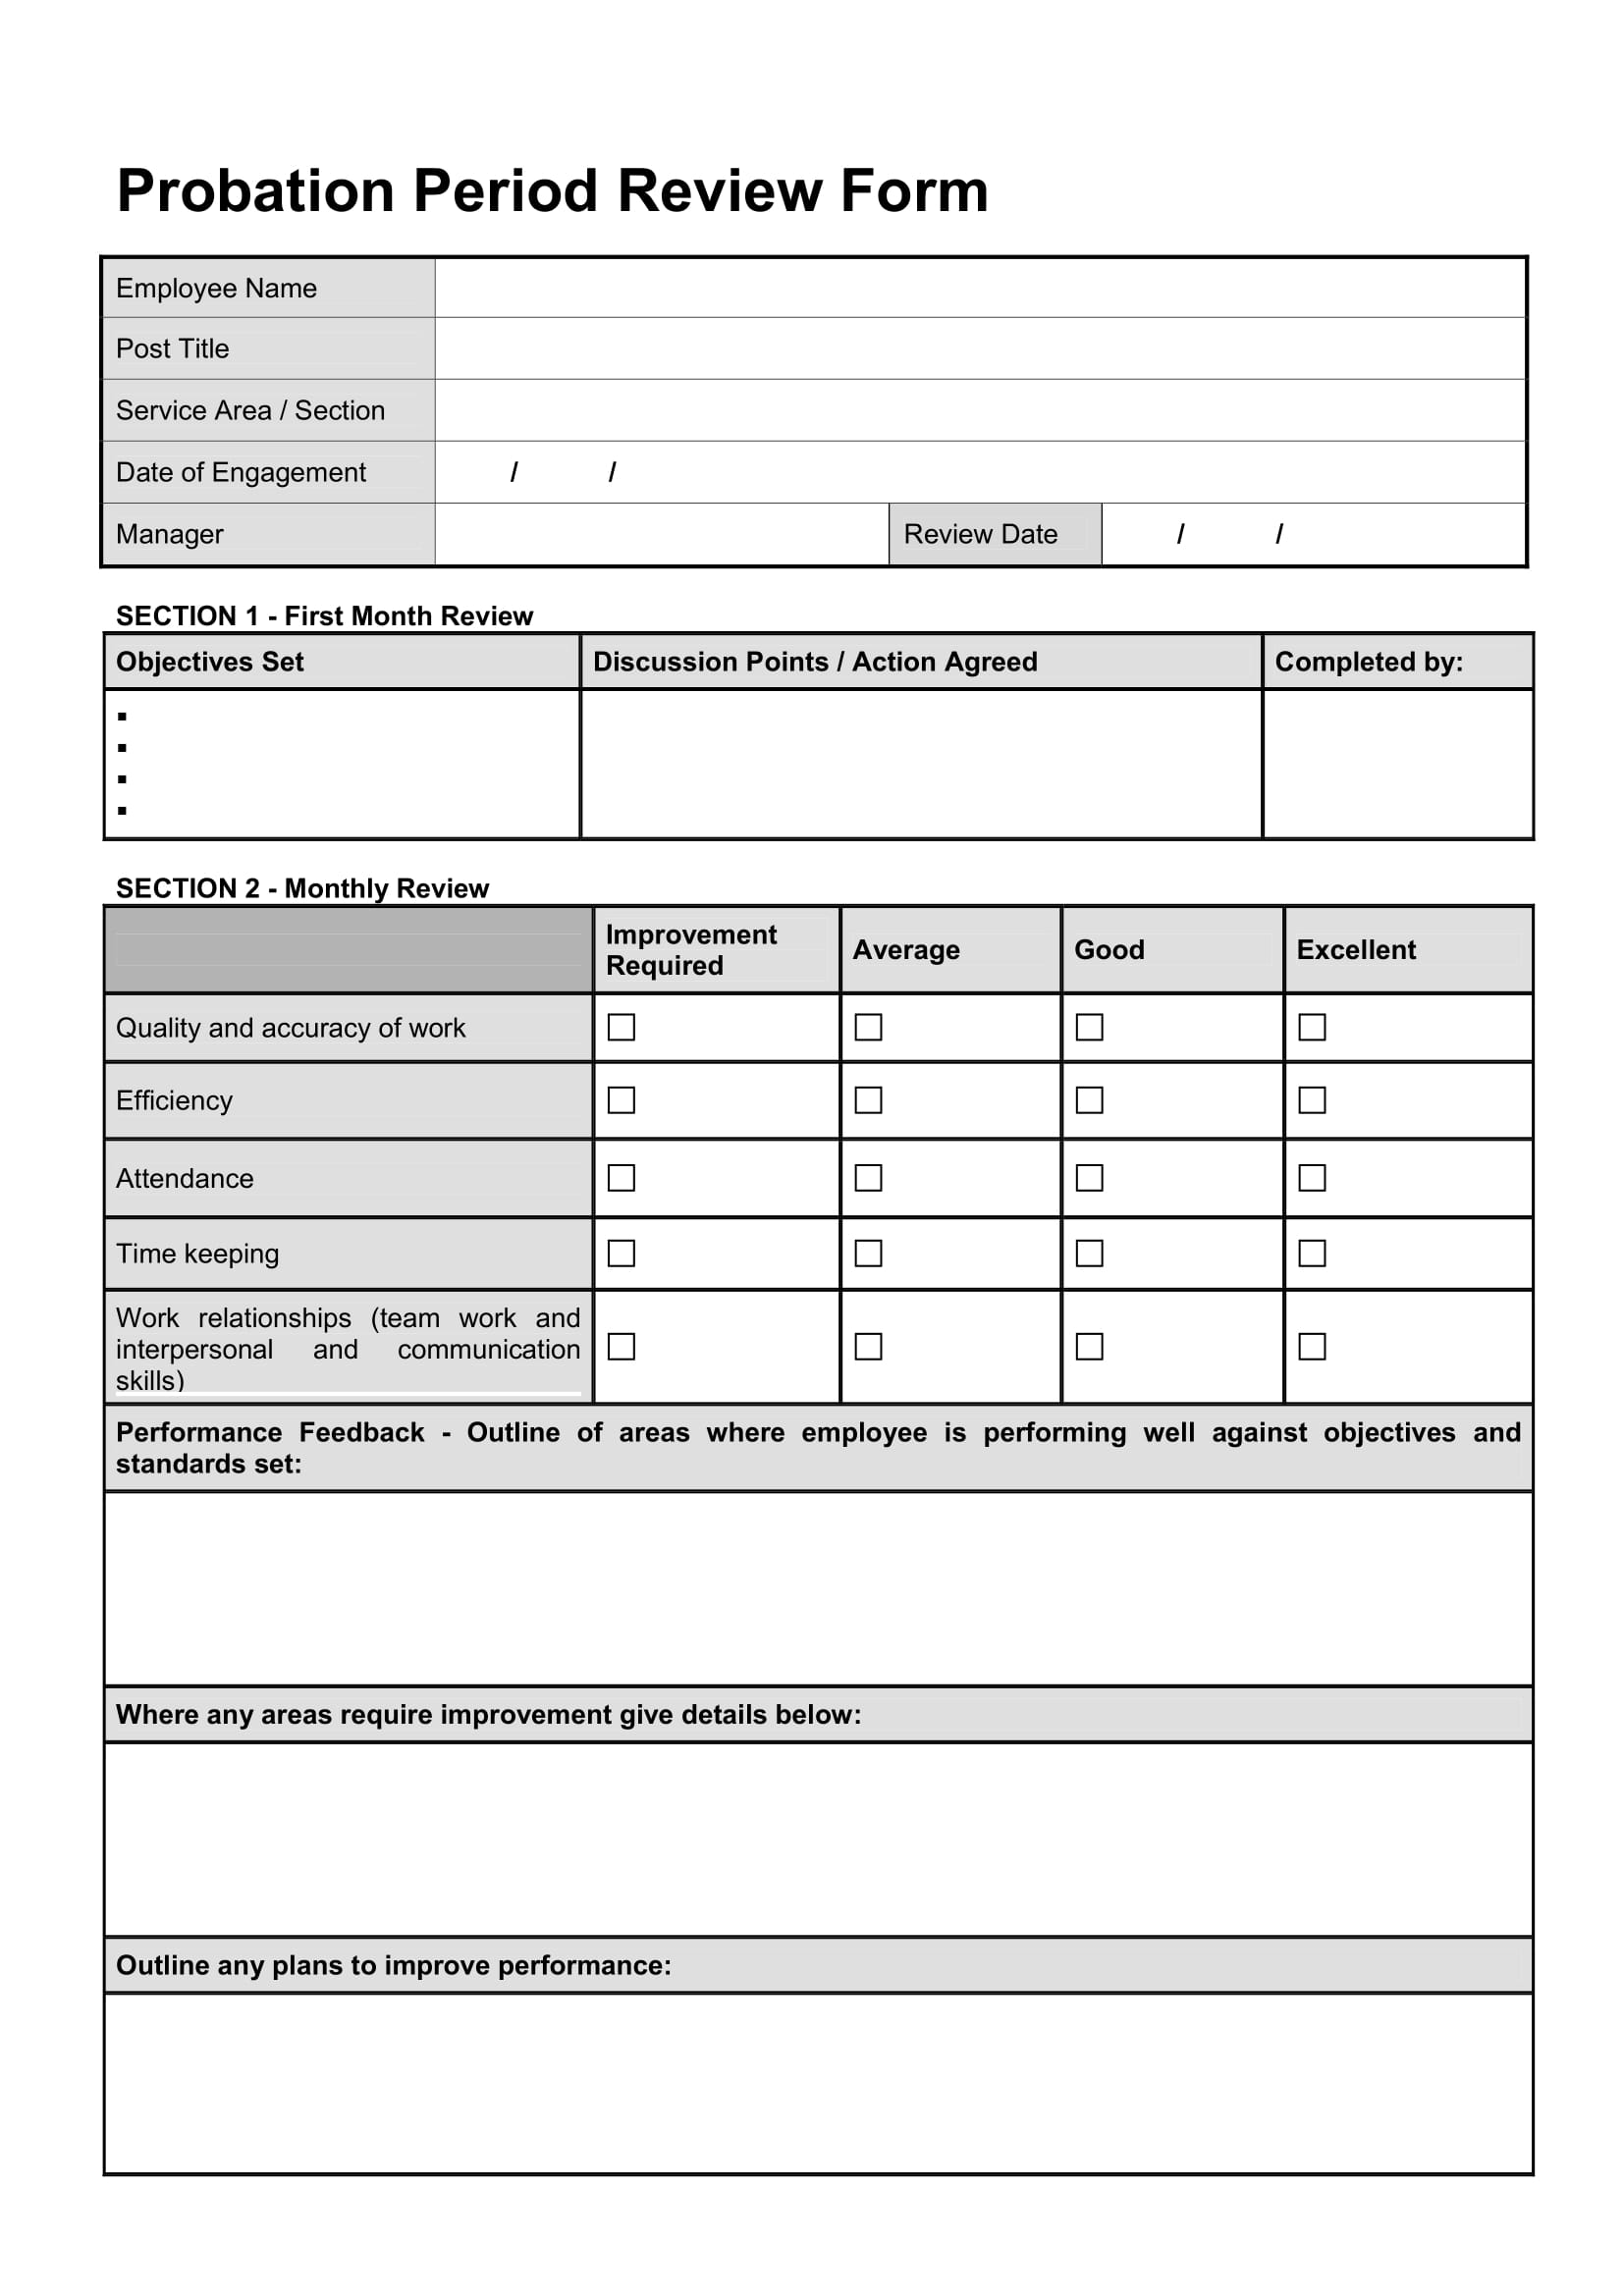 probation period review form 1